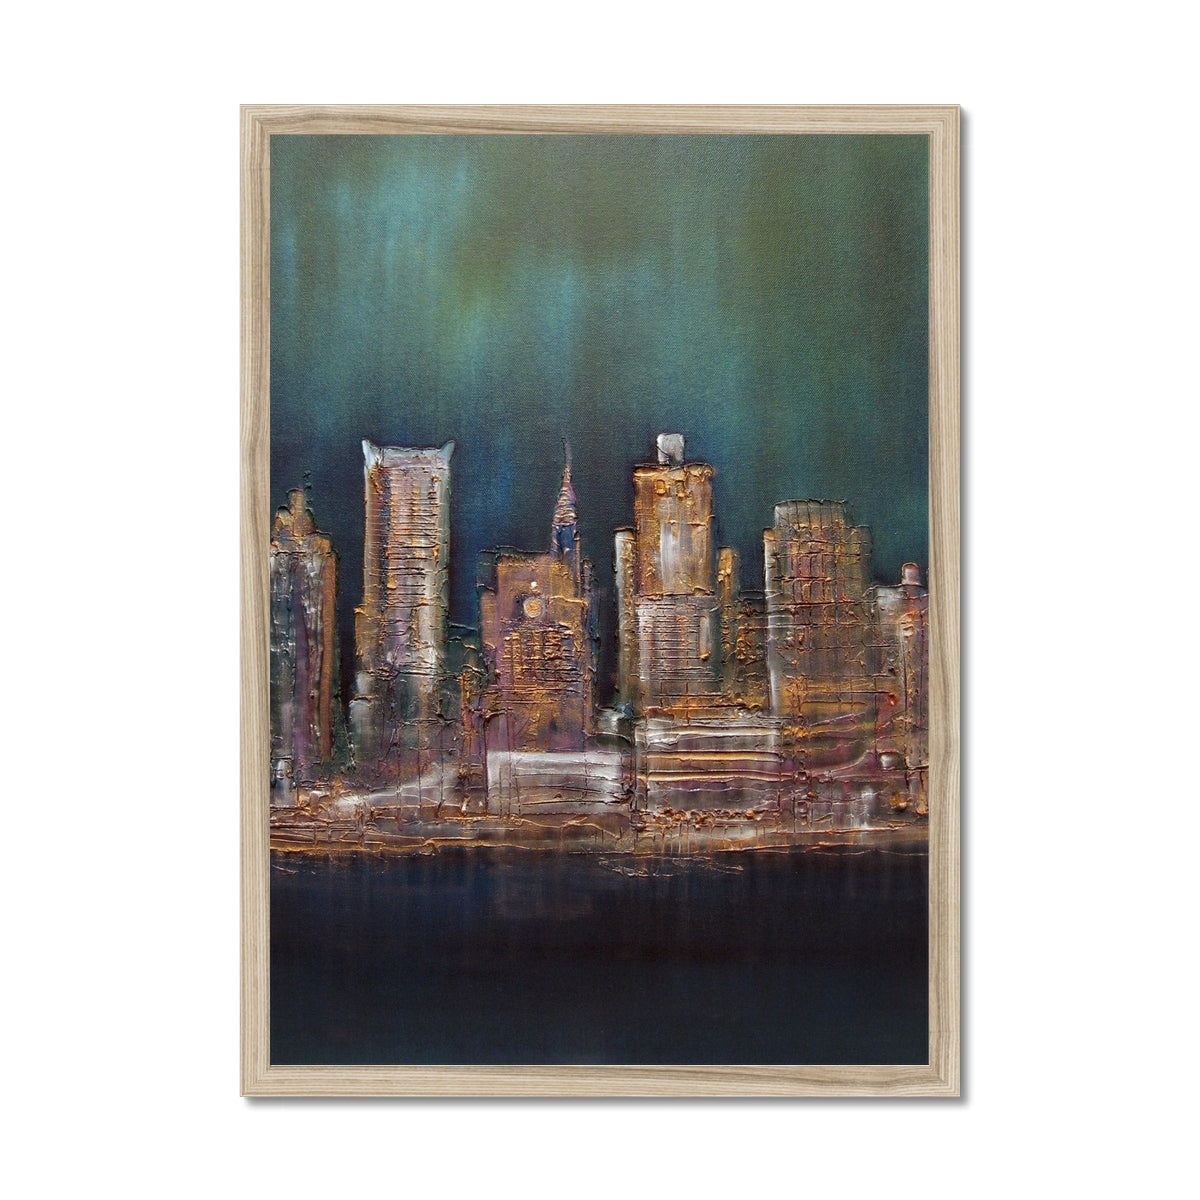 New York West Side Painting | Framed Prints From Scotland-Framed Prints-World Art Gallery-A2 Portrait-Natural Frame-Paintings, Prints, Homeware, Art Gifts From Scotland By Scottish Artist Kevin Hunter